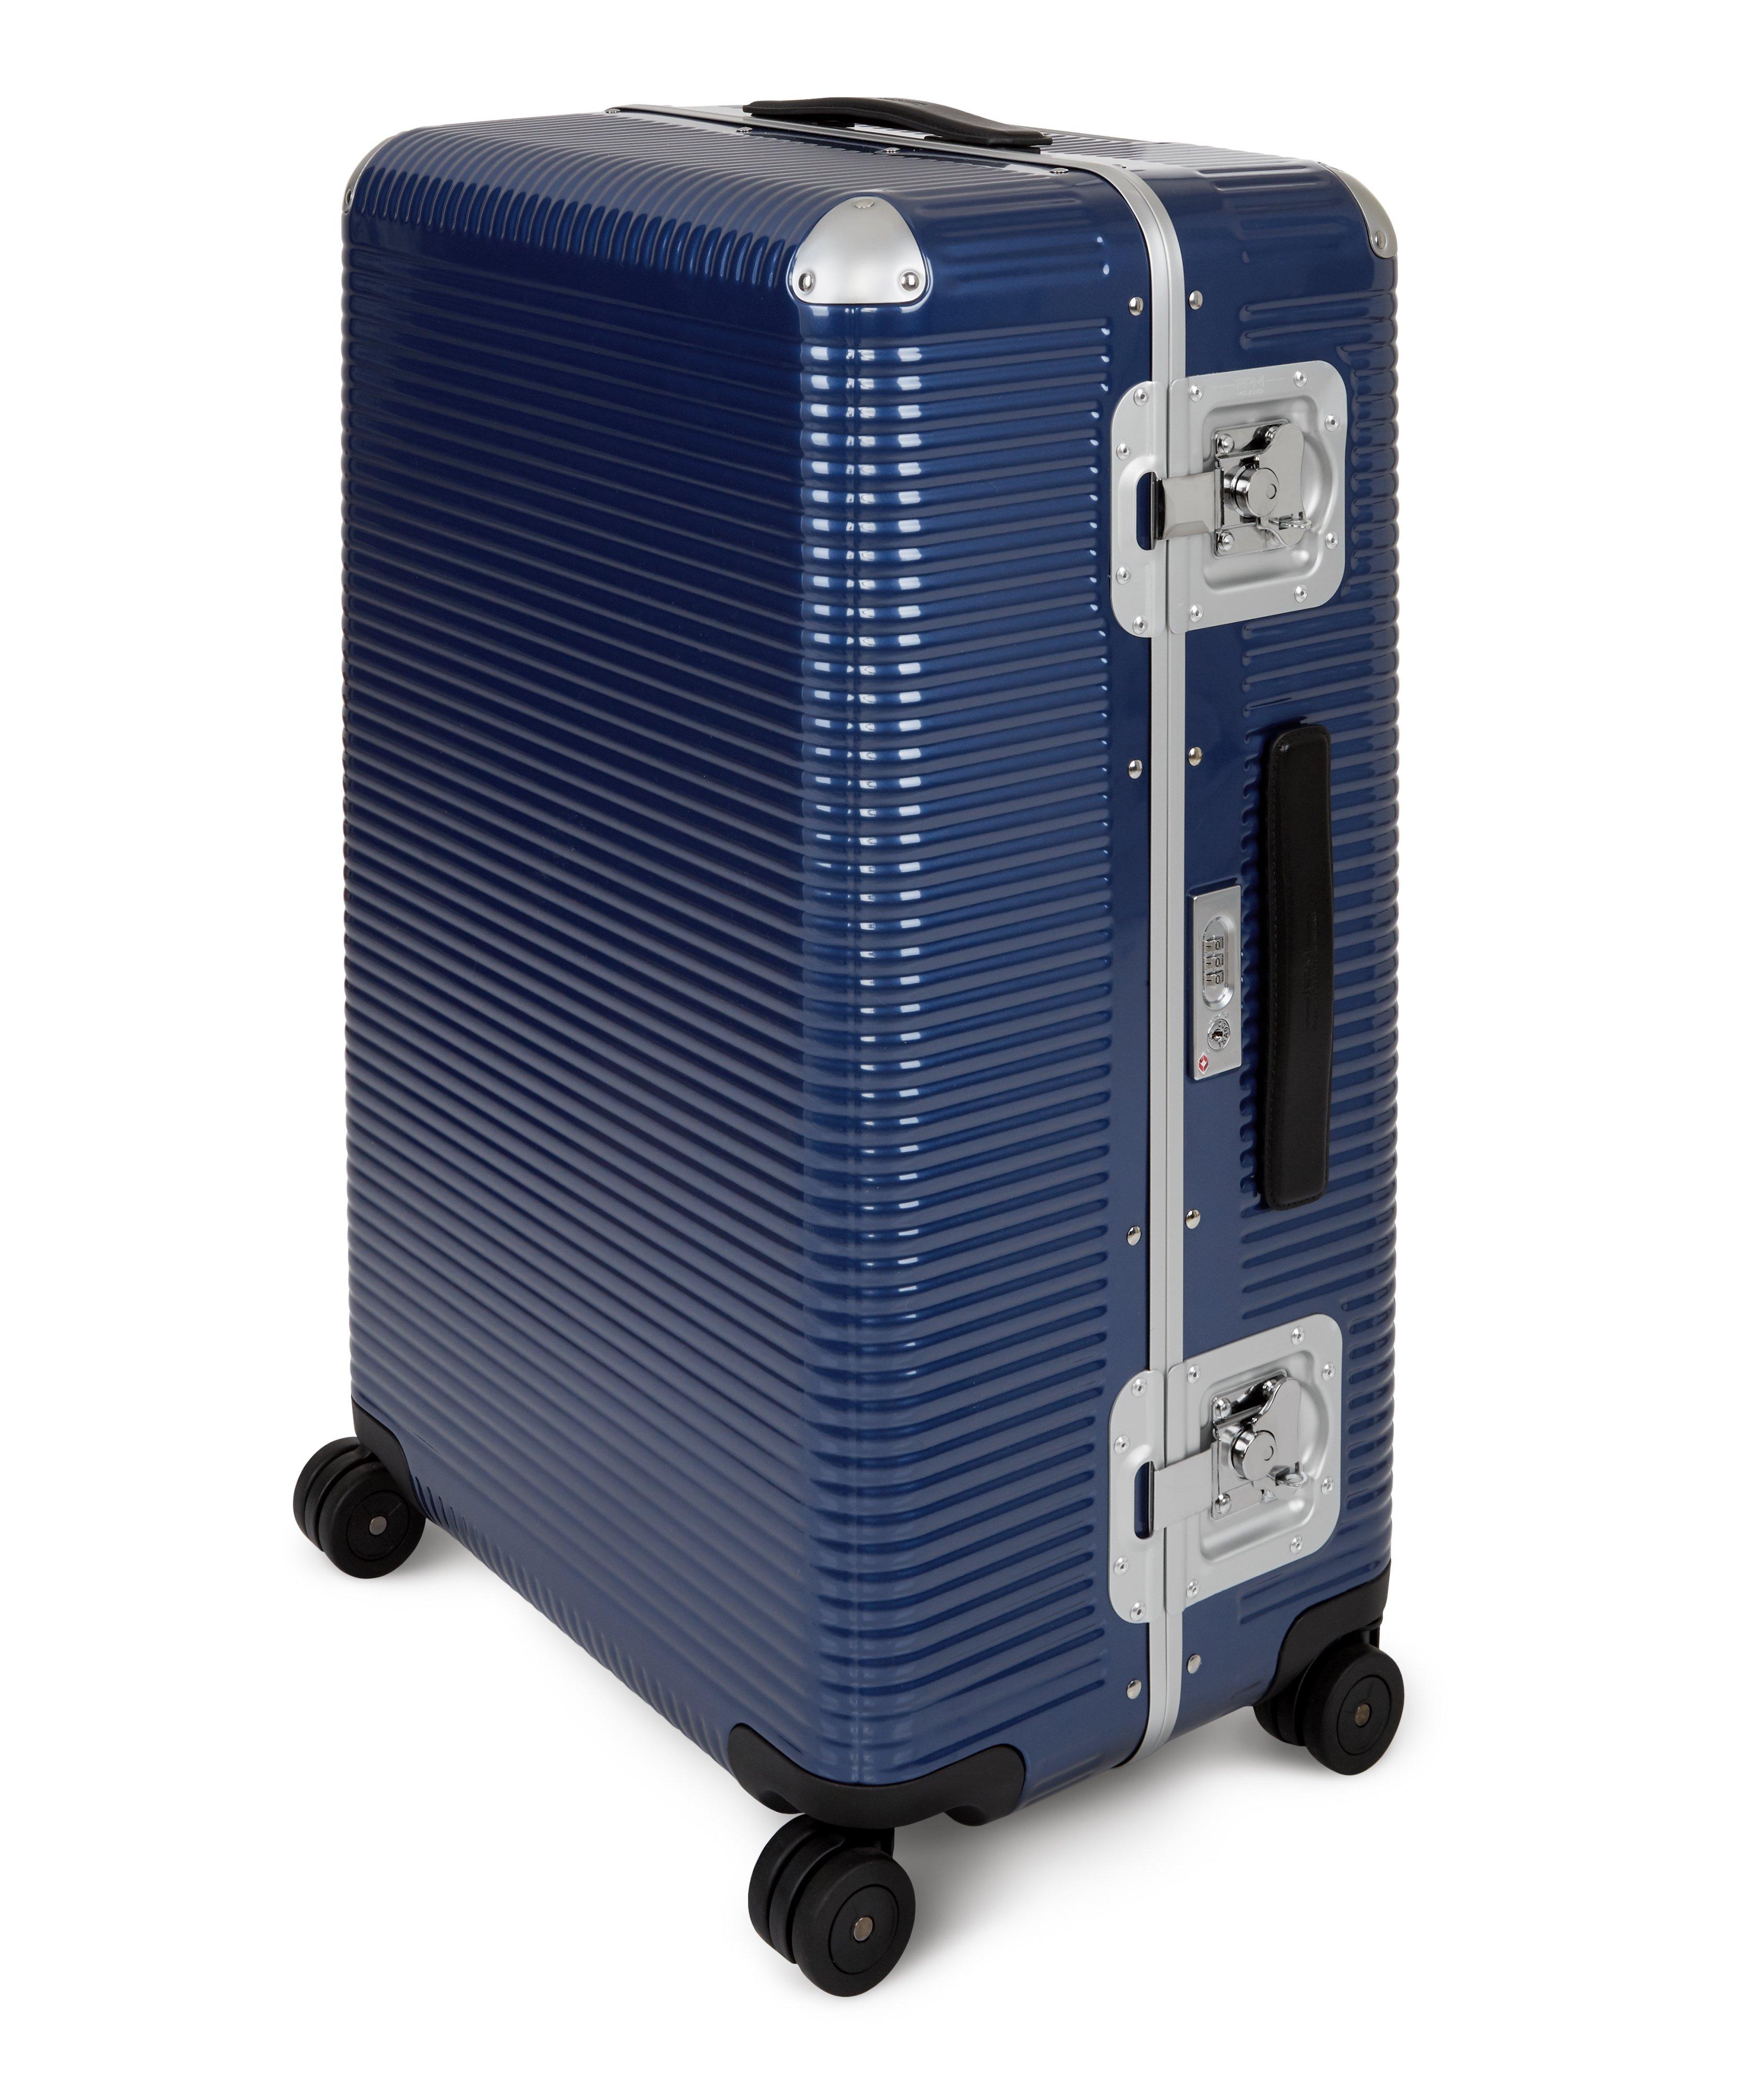 Bank Light Trunk On Wheels Polycarbonate Luggage image 0